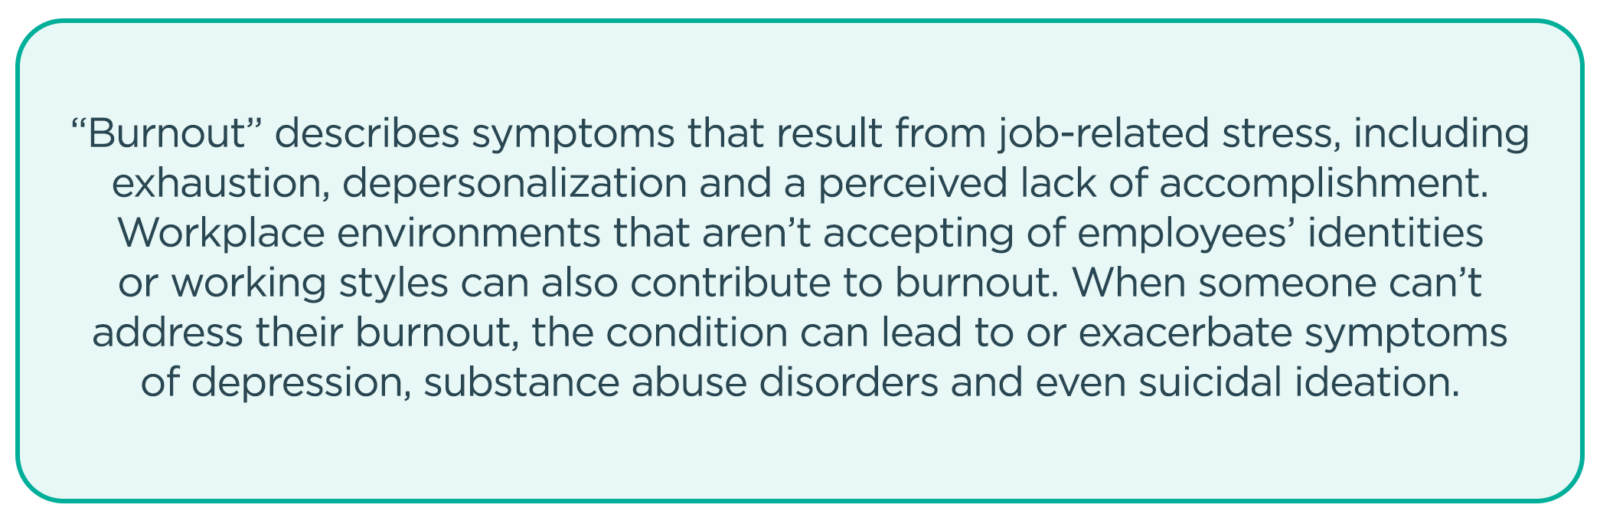 "Burnout" describes symptoms that result from job-related stress, including exhaustion, depersonalization and a perceived lack of accomplishment. Workplace environments that aren't accepting of employees' identities or working styles can also contribute to burnout. When someone can't address their burnout, the condition can lead to or exacerbate symptoms of depression, substance abuse disorders and even suicidal ideation.